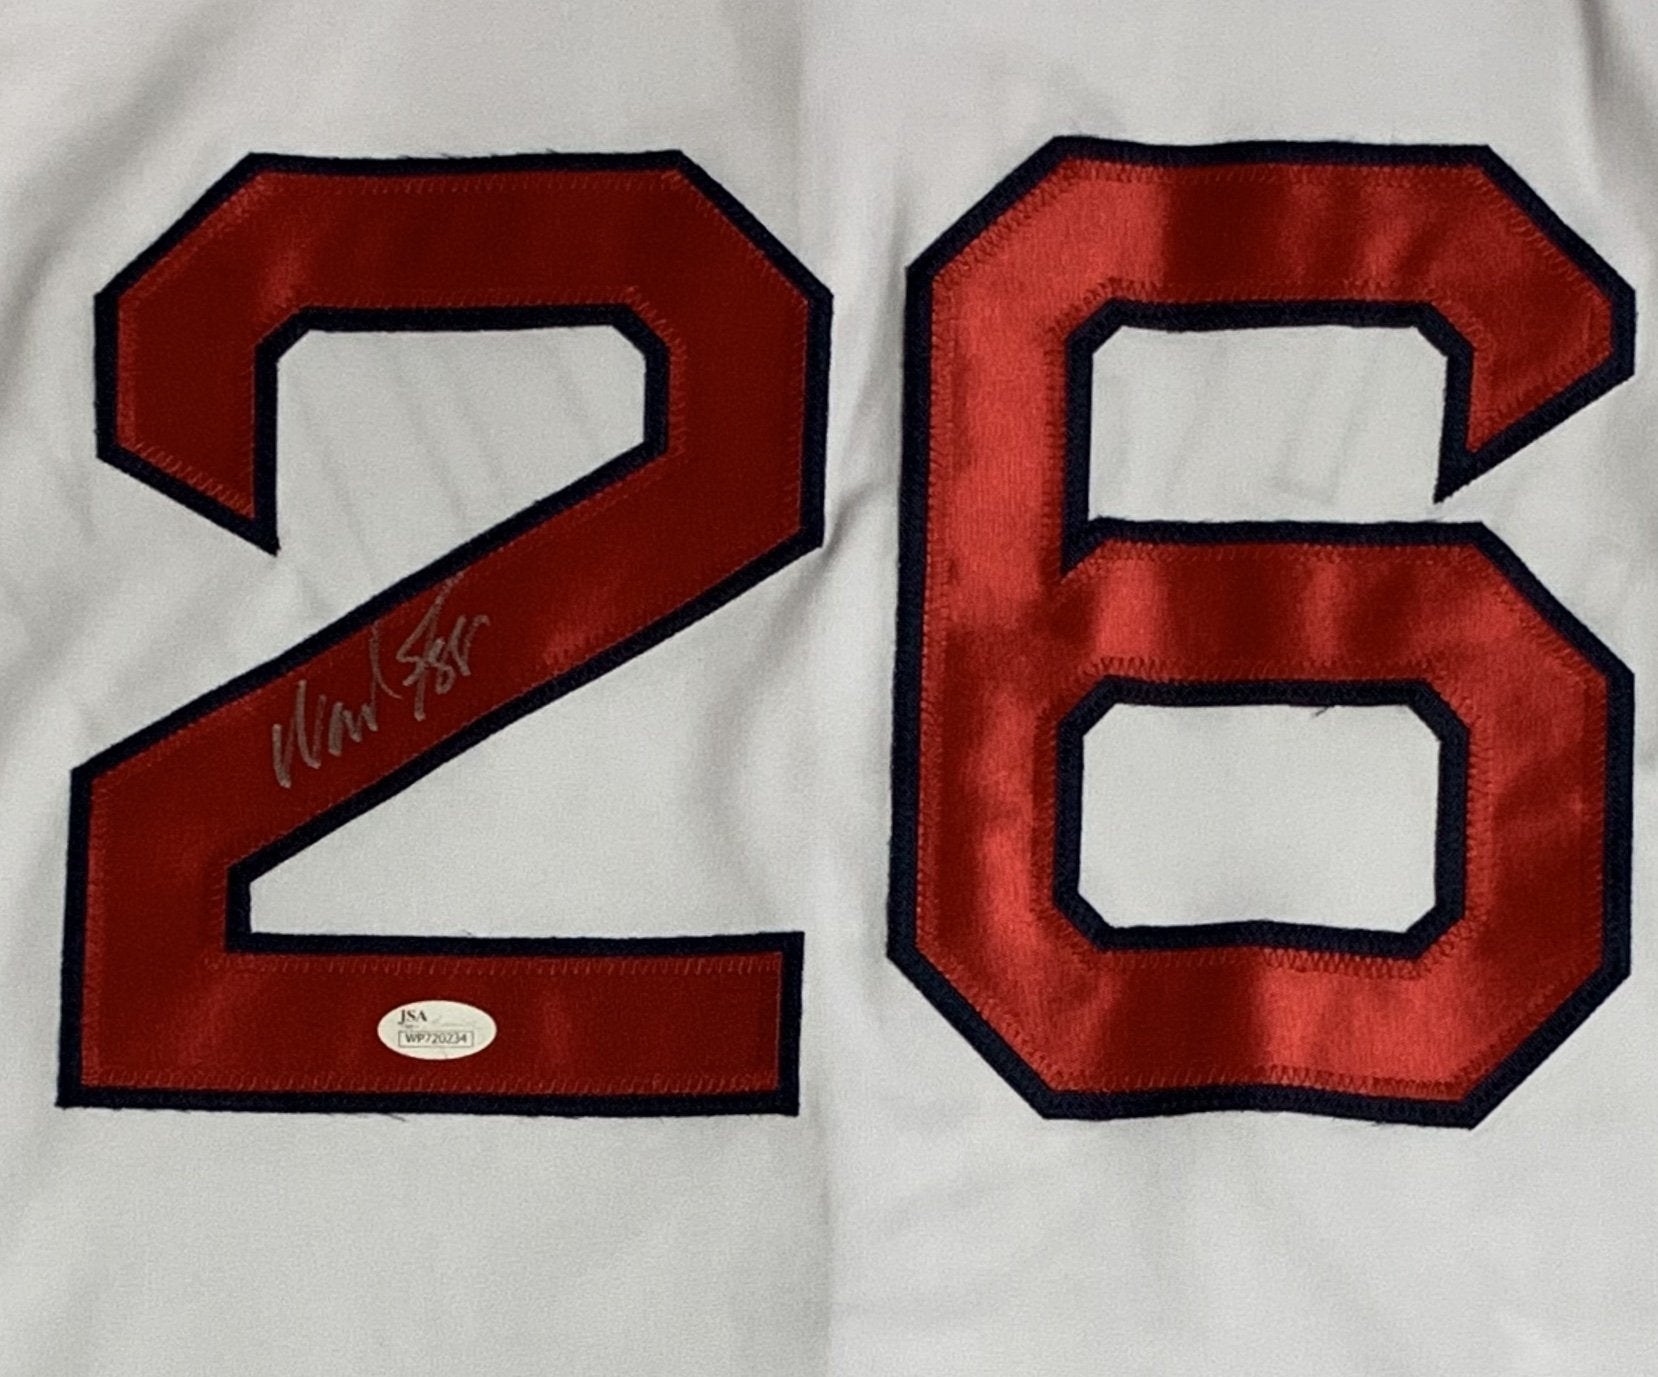 Wade Boggs Signed Game Jersey 1990 Boston Red Sox HOF